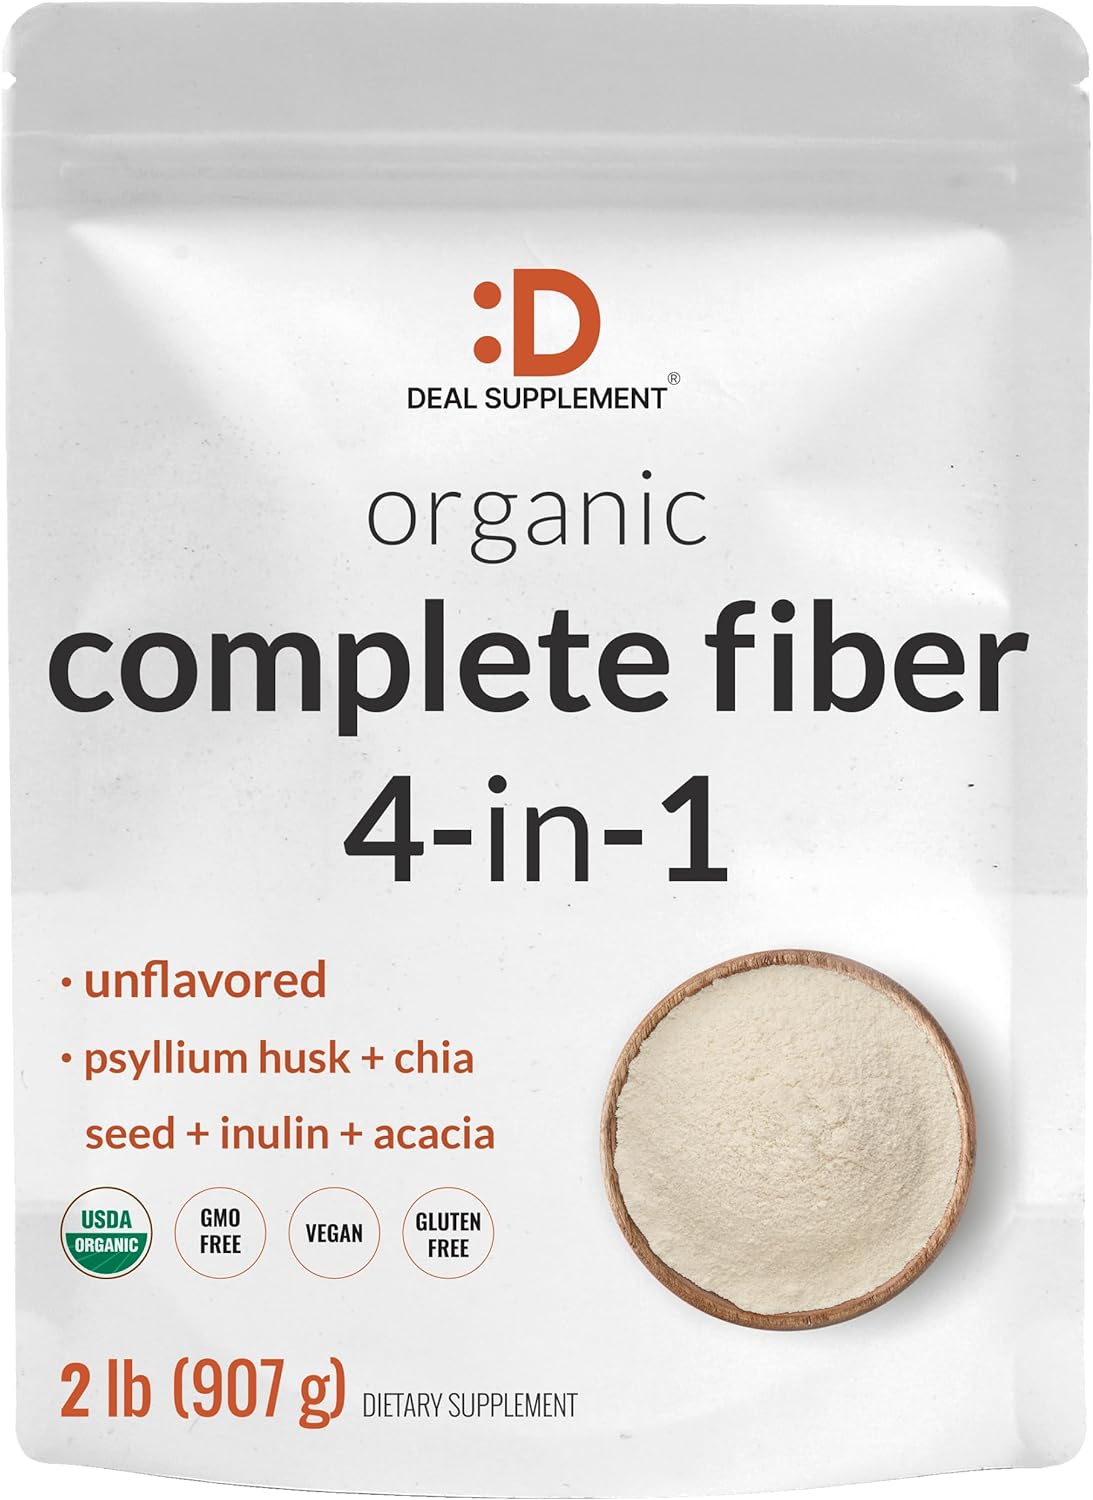 DEAL SUPPLEMENT Organic Fiber Powder Supplement, 2lbs – with Psyllium Husk, Chia Seed, Inulin, & Acacia – Daily Fiber for Adults – Rich in Prebiotics for Gut & Digestive Health – Unflavored, Non-GMO